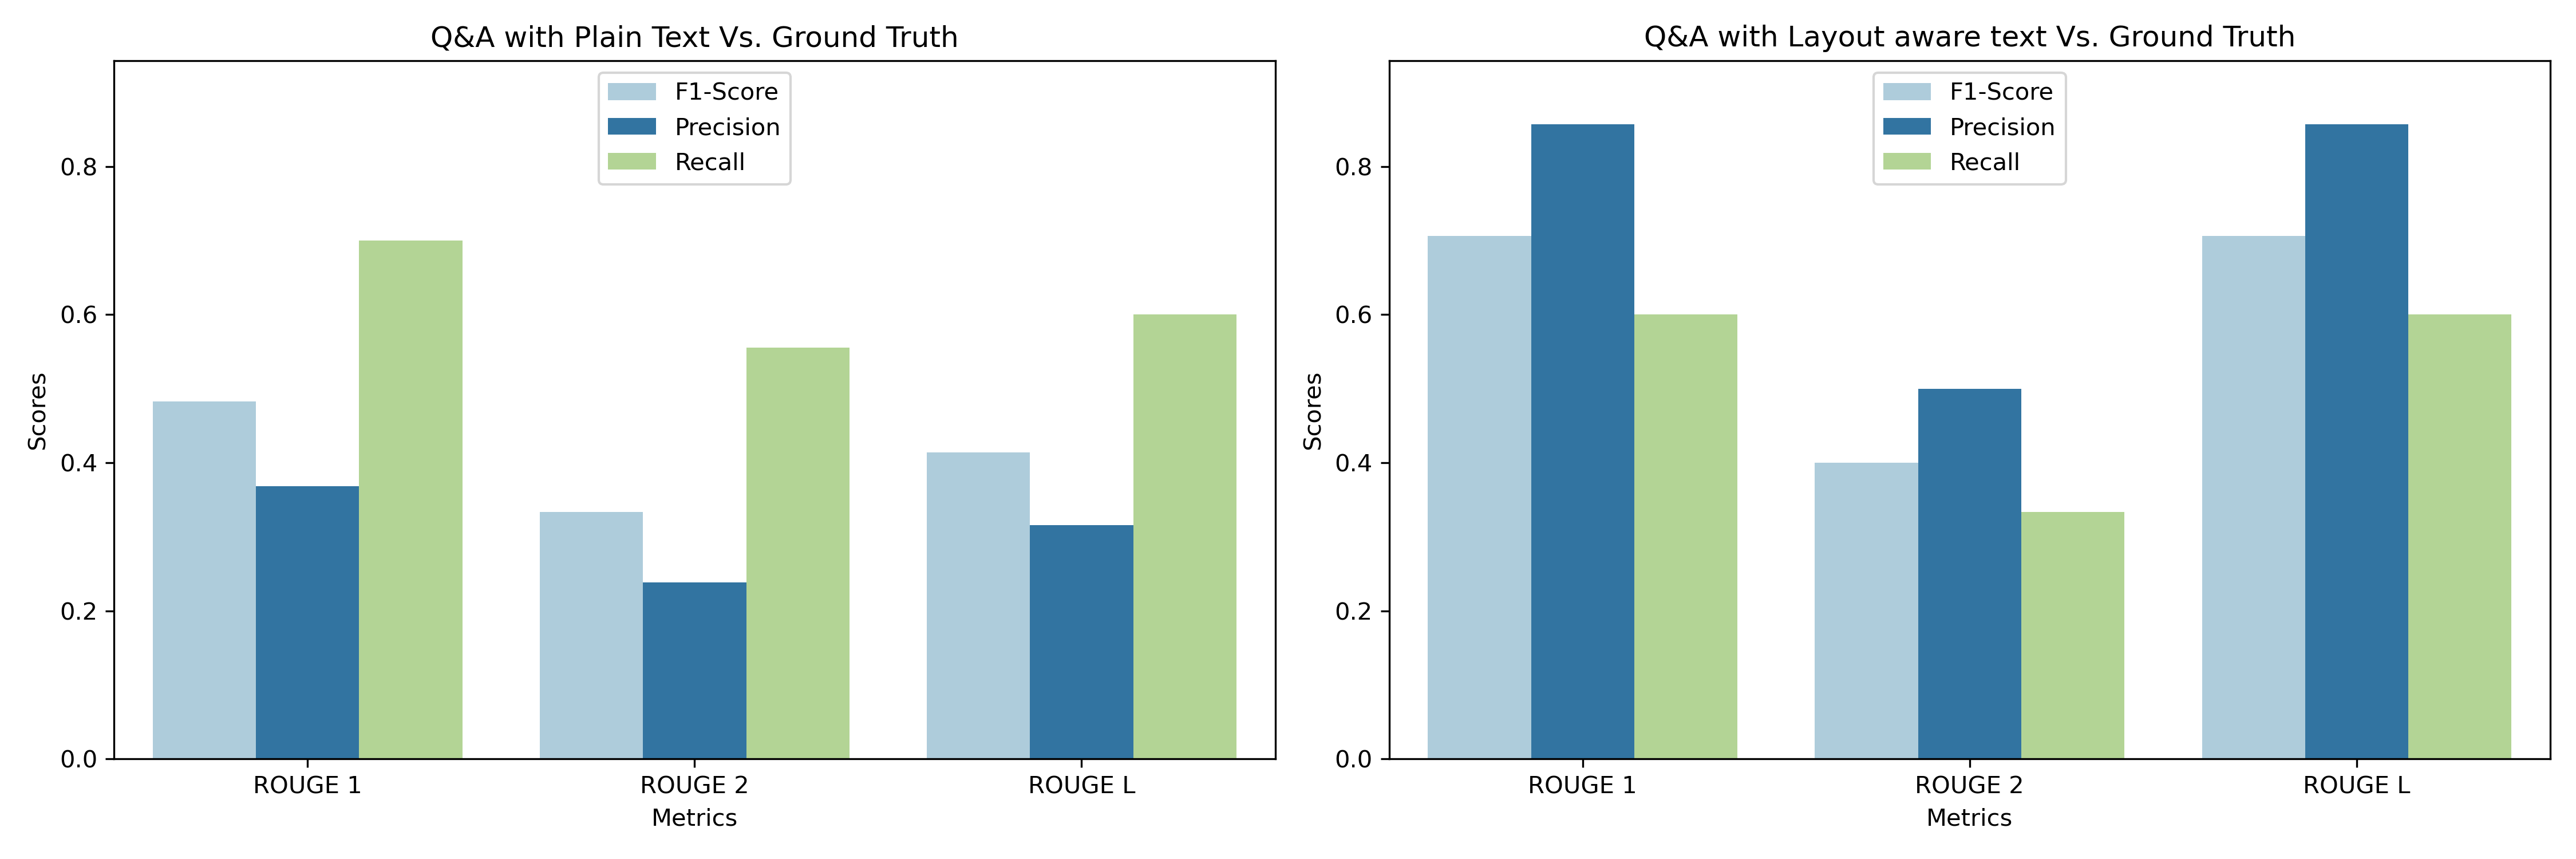 ROUGE plot on Q&A task result with Layout